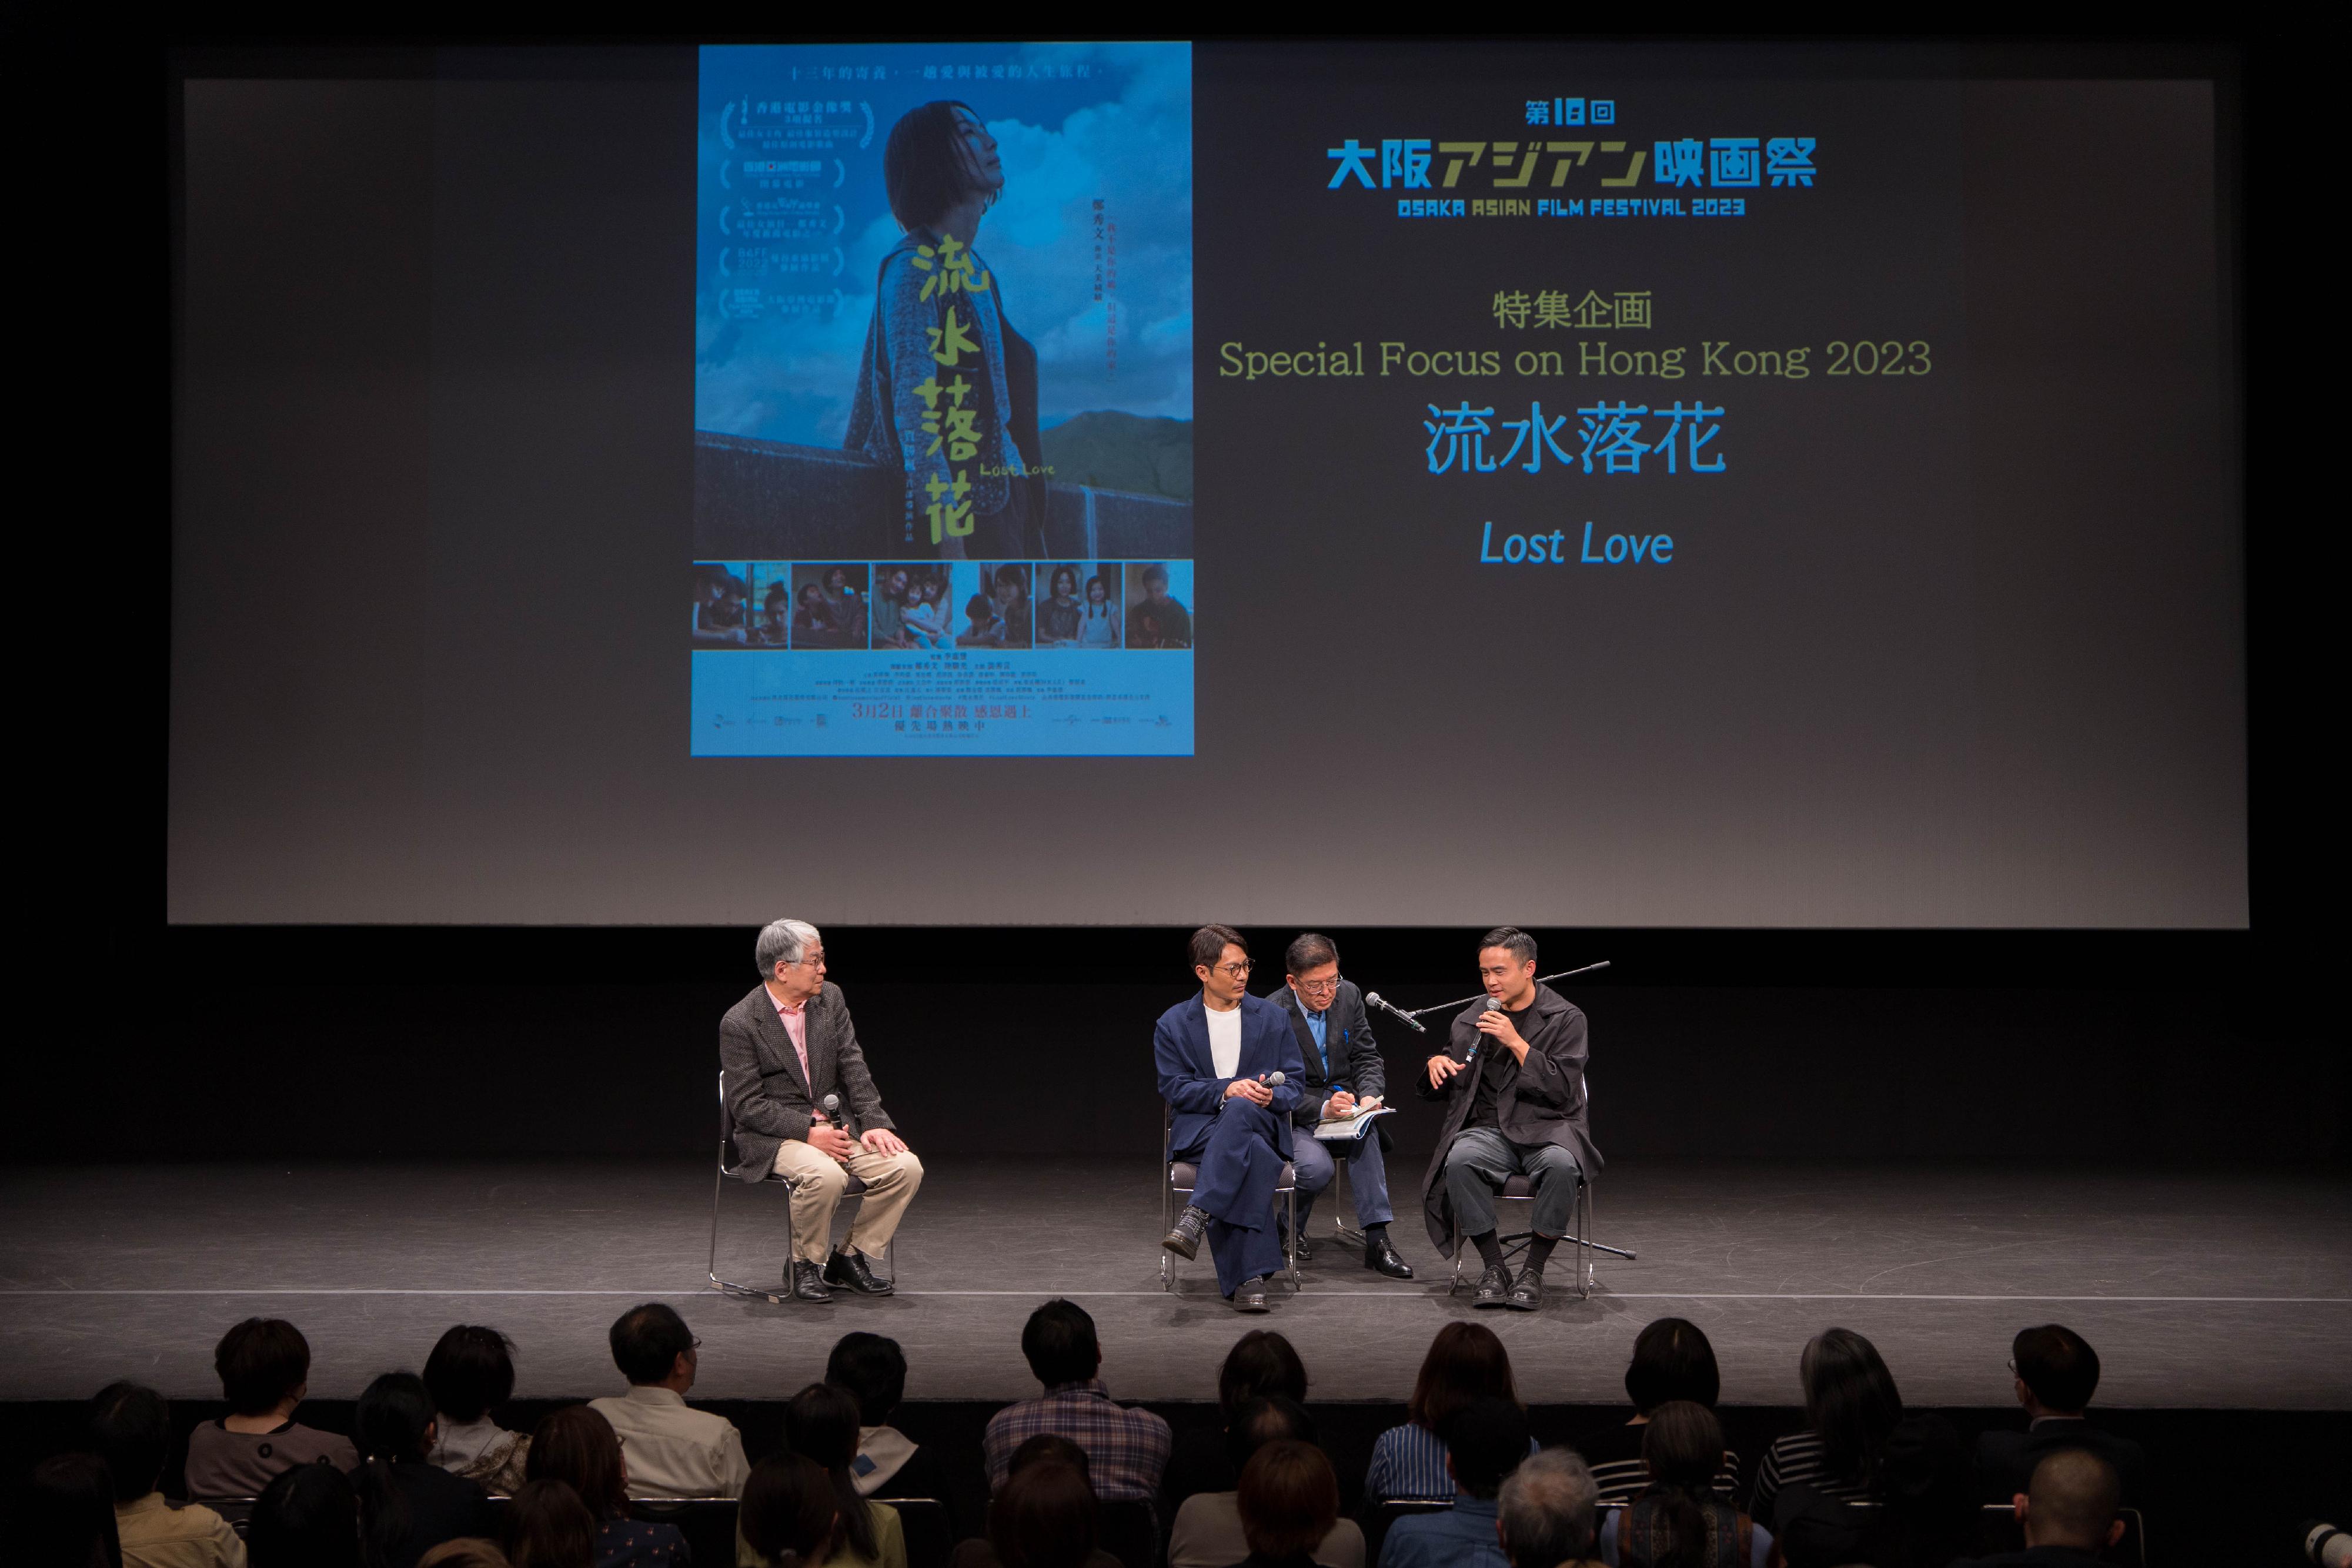 The "Hong Kong Gala Screening" featuring the Hong Kong film "Lost Love" was held in Osaka, Japan, tonight (March 16). Photo shows director Ka Sing-fung (right) and actor Alan Luk (second left) of "Lost Love" participating in a sharing session with the audience after the screening.